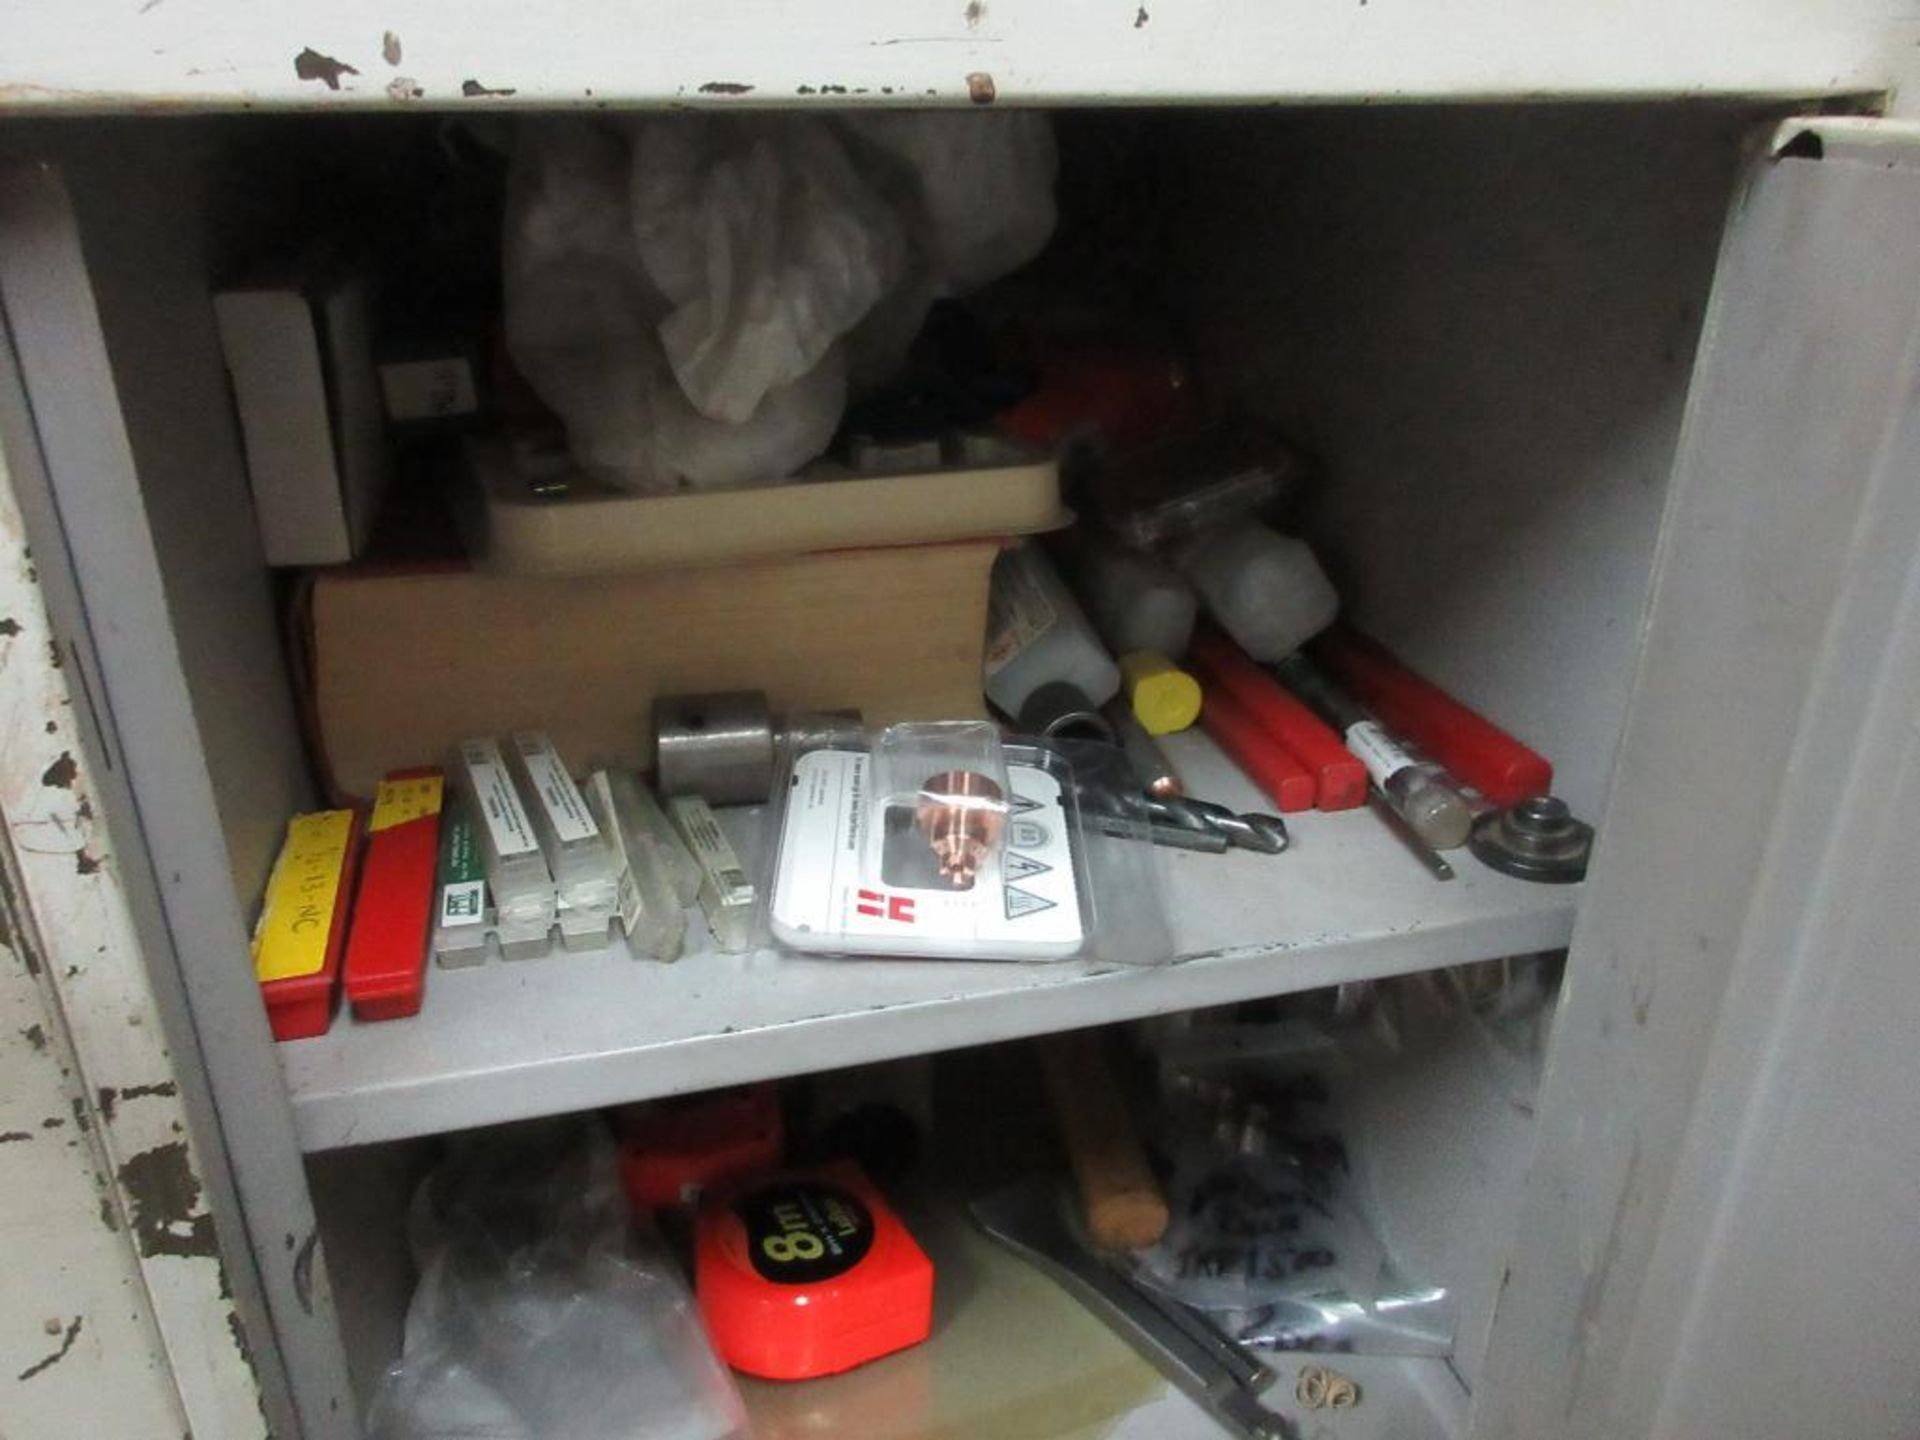 CONTENTS OF 3 CABINETS IN WORK AREA, TEST AND MEASUREMENT EQUIPMENT, METERS, TOOLS, ETC (OFFICES) - Image 16 of 18